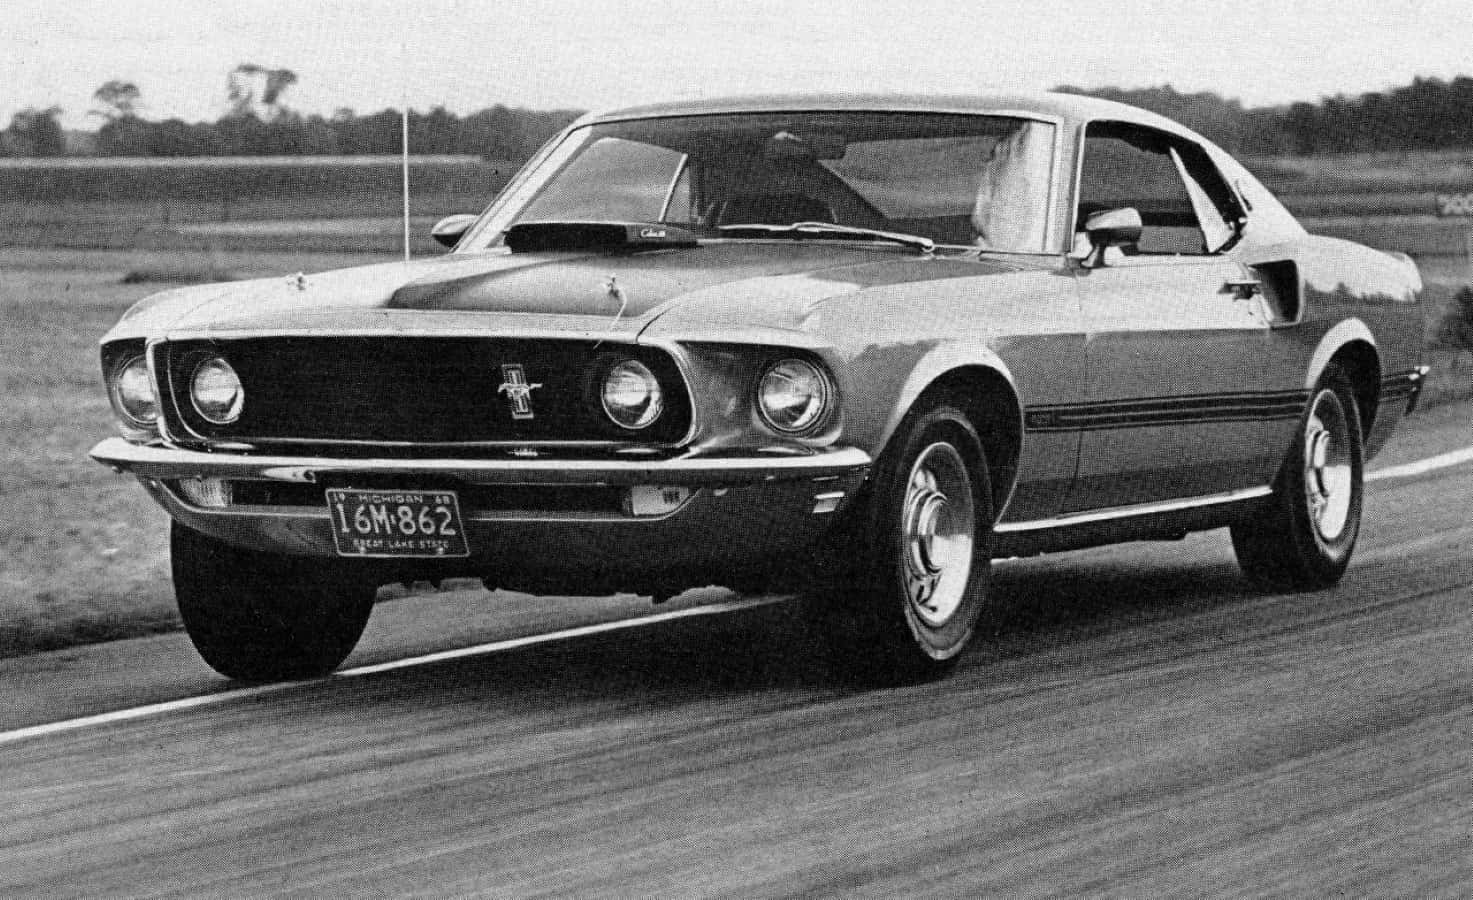 Caption: Ford Mustang Mach 1 showcasing speed and style Wallpaper